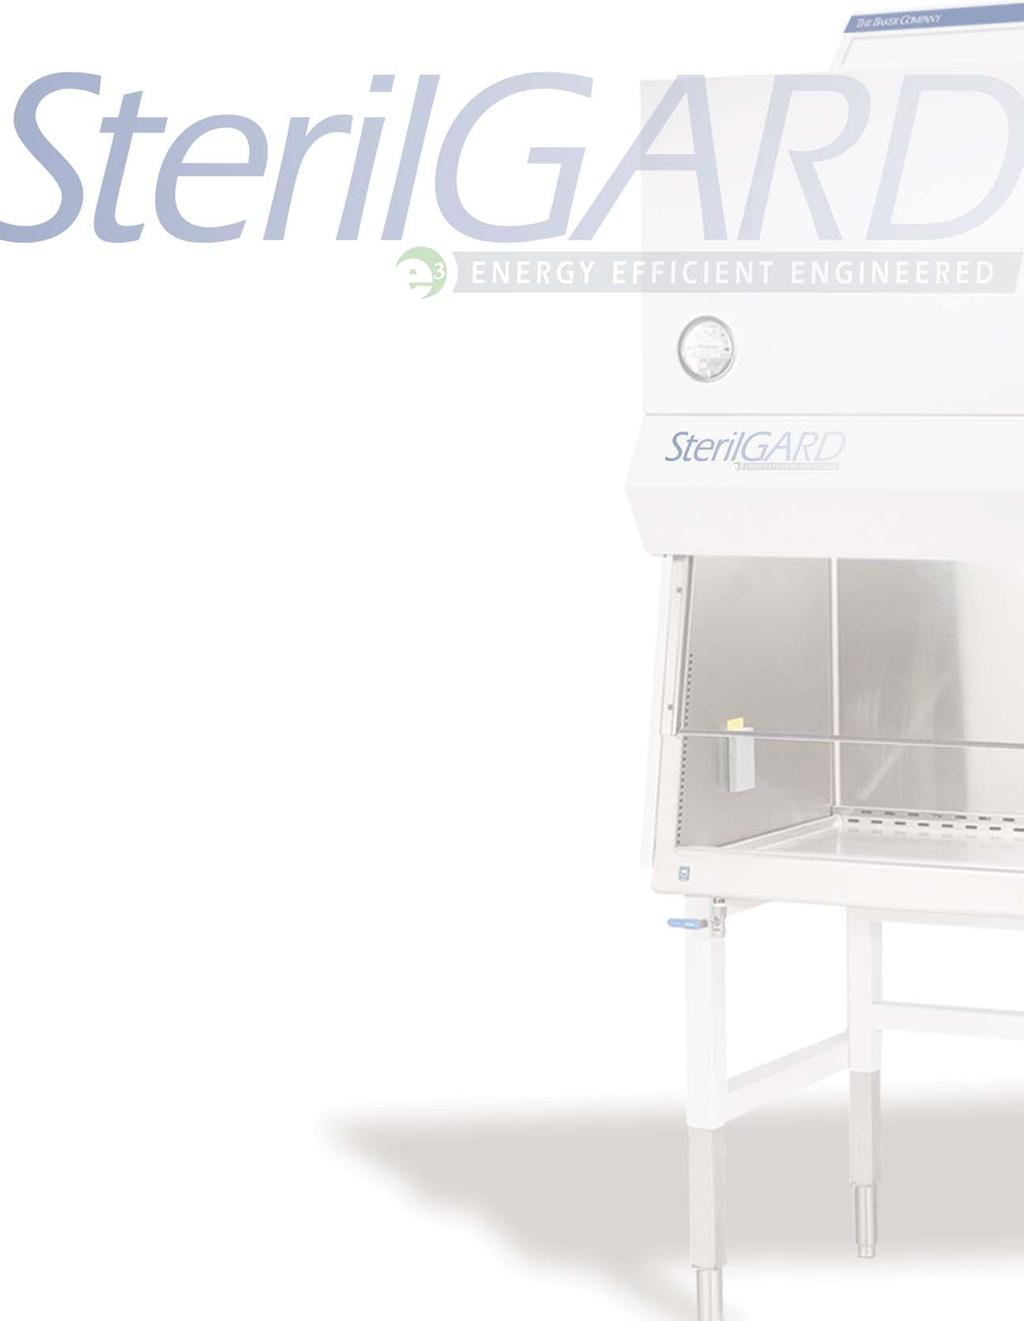 The SterilGARD e3 biological safety cabinet from The Baker Company offers a revolutionary airflow management system with proven containment technology that saves energy, increases productivity and